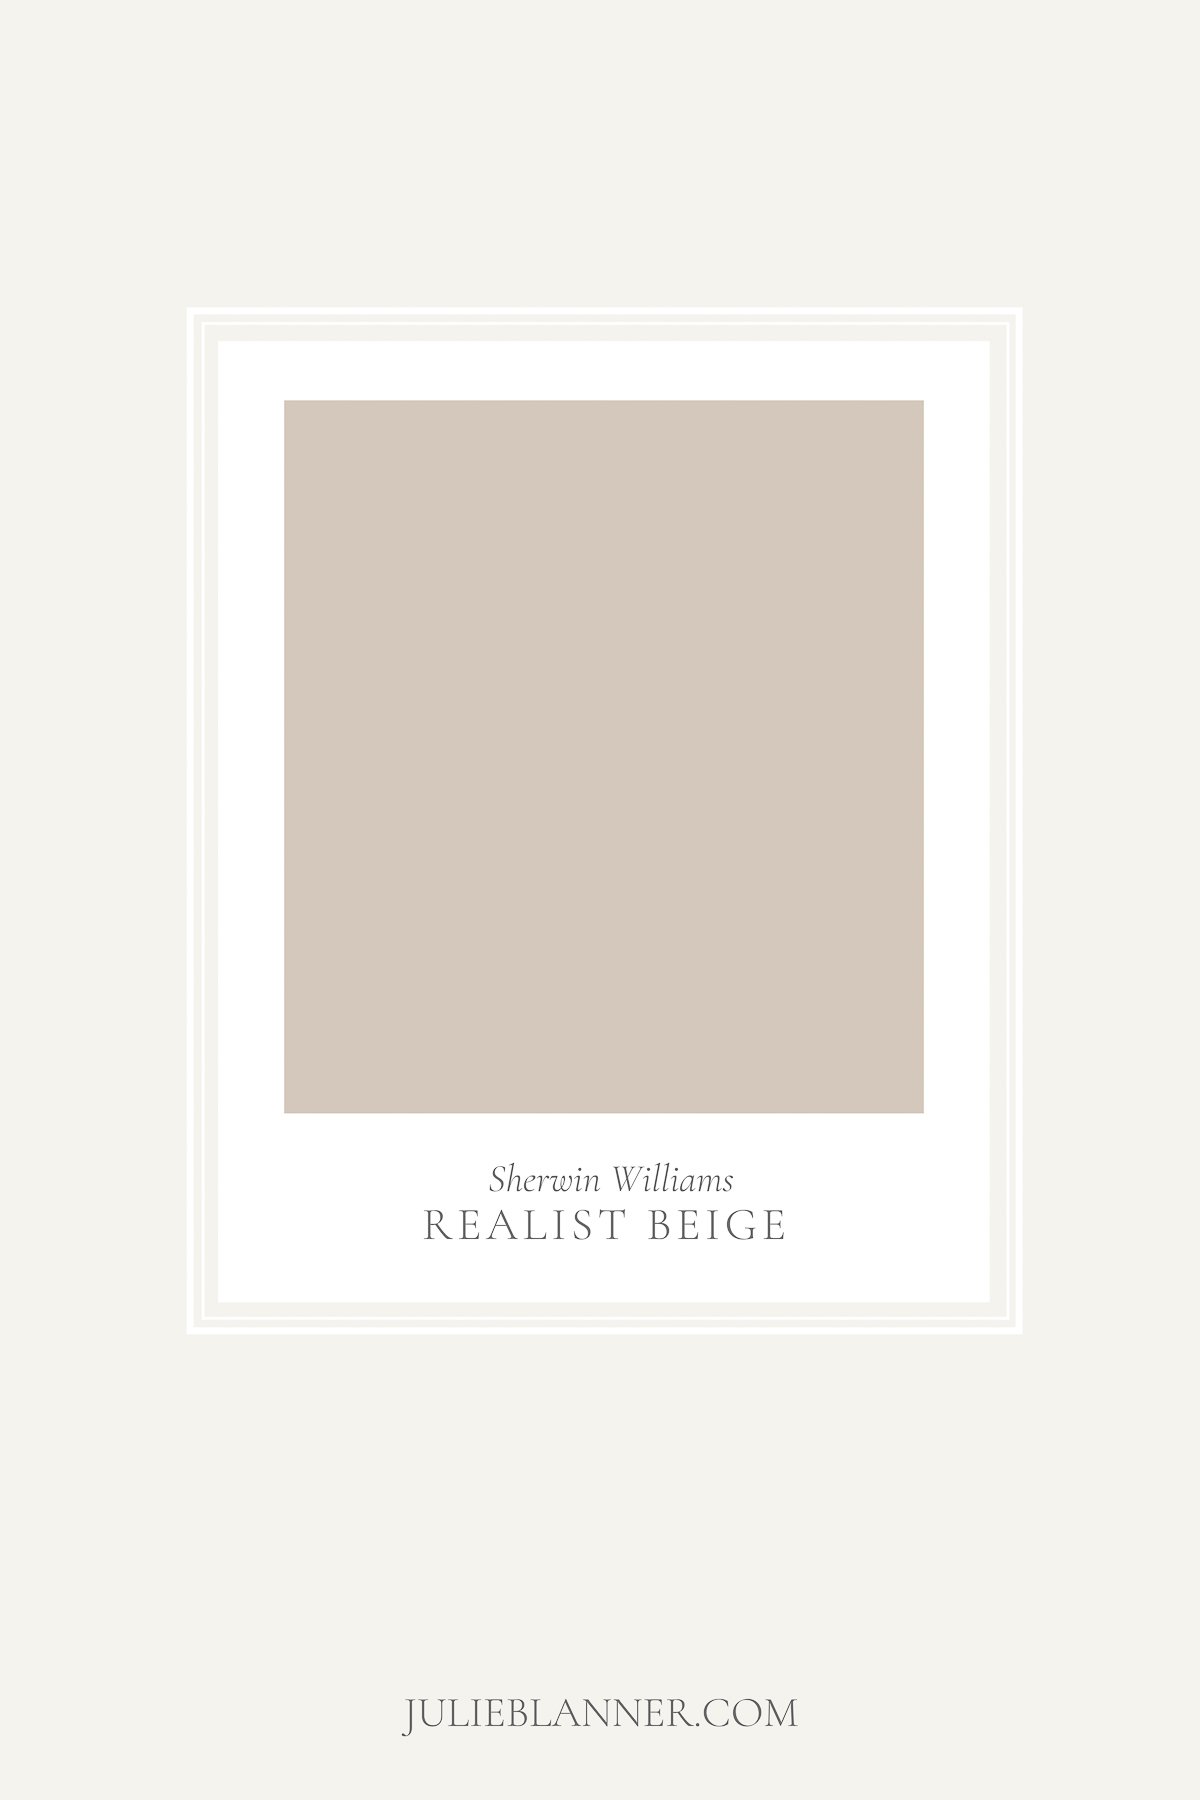 A graphic featuring a paint card for Sherwin Williams Realist Beige, a deck paint color.